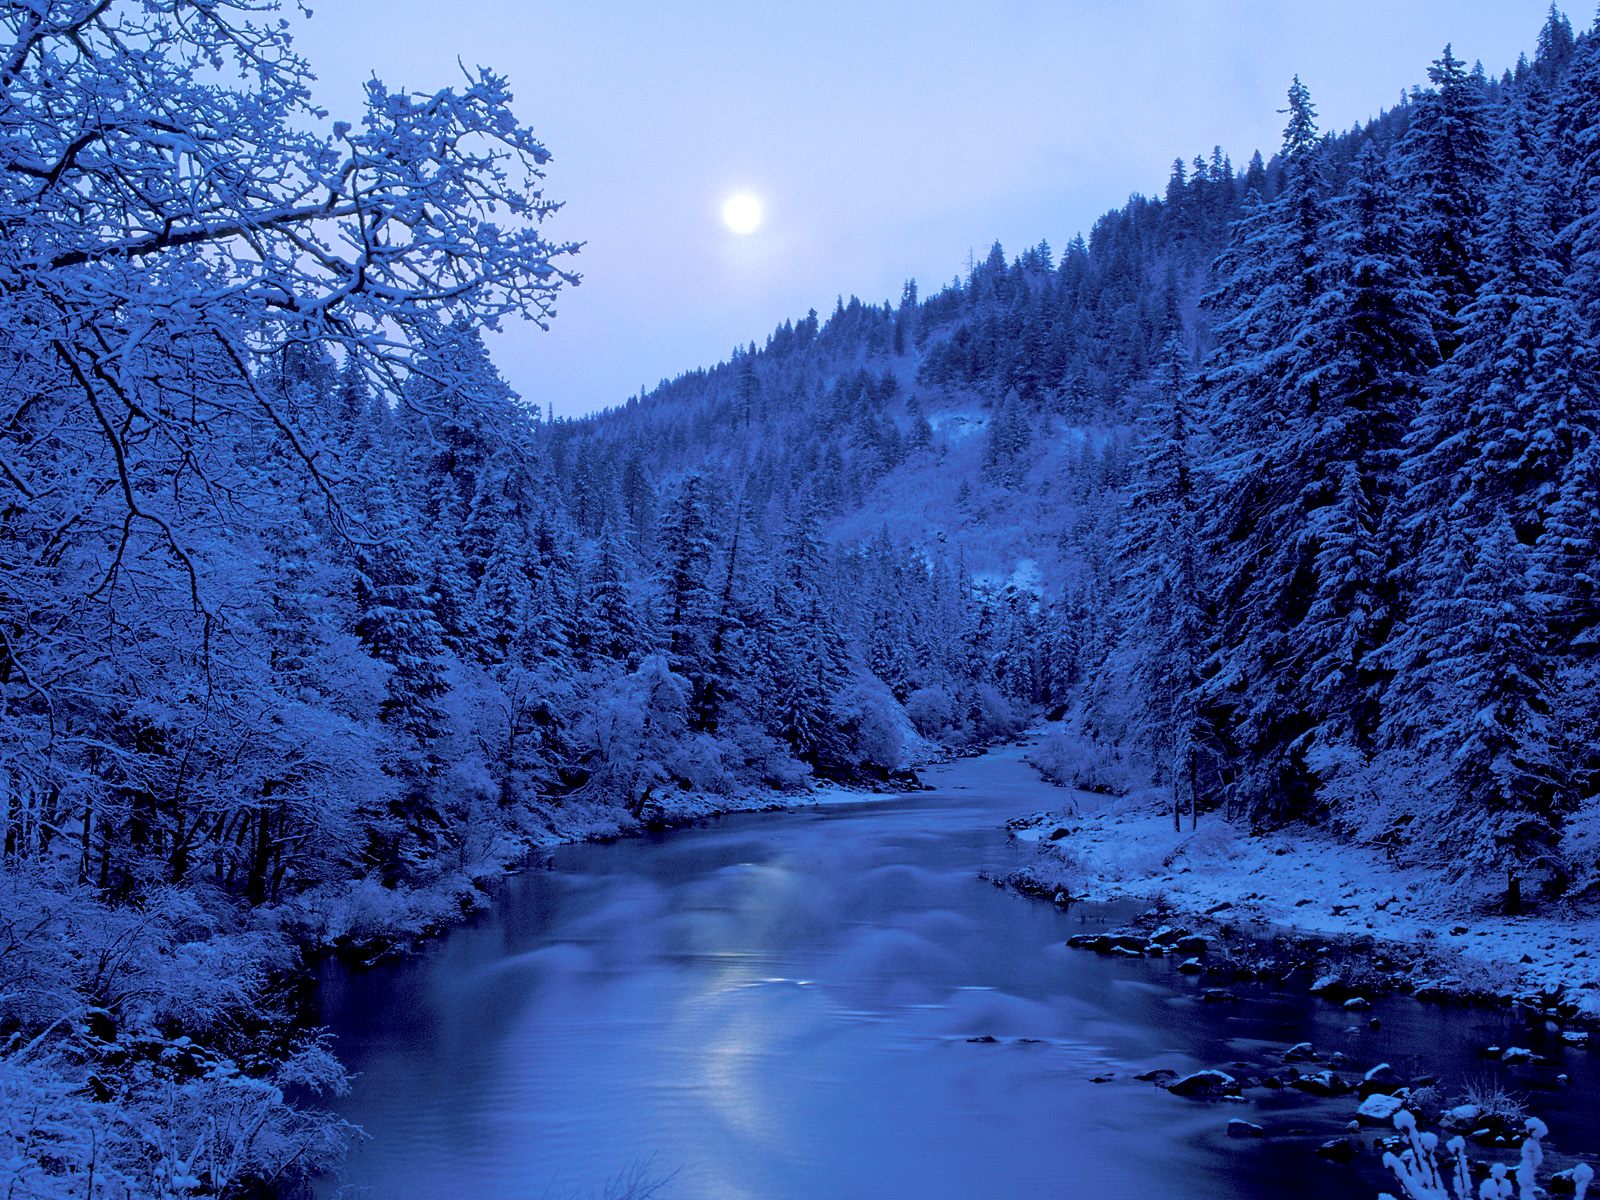 Snow-covered river reflecting the sun creates a serene winter landscape.